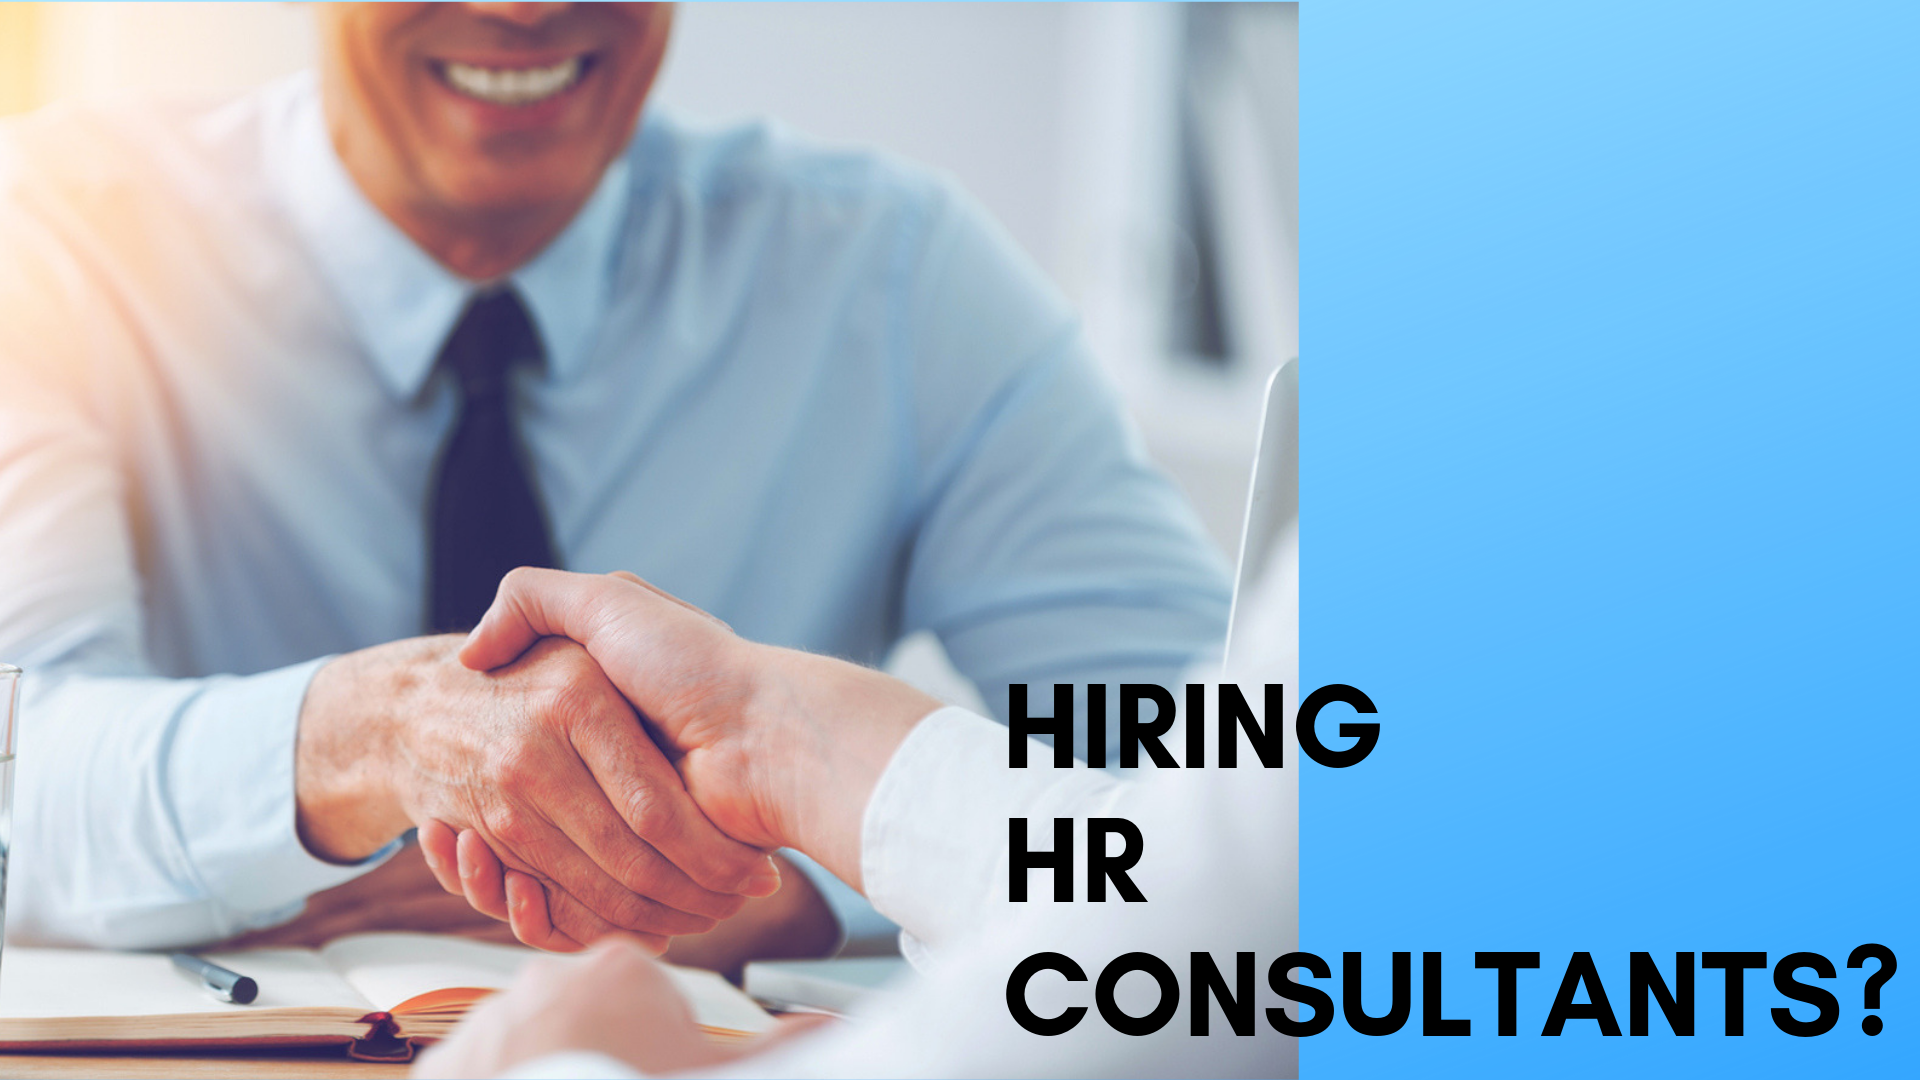 What Attributes Should You Look For When Hiring HR Consultants?